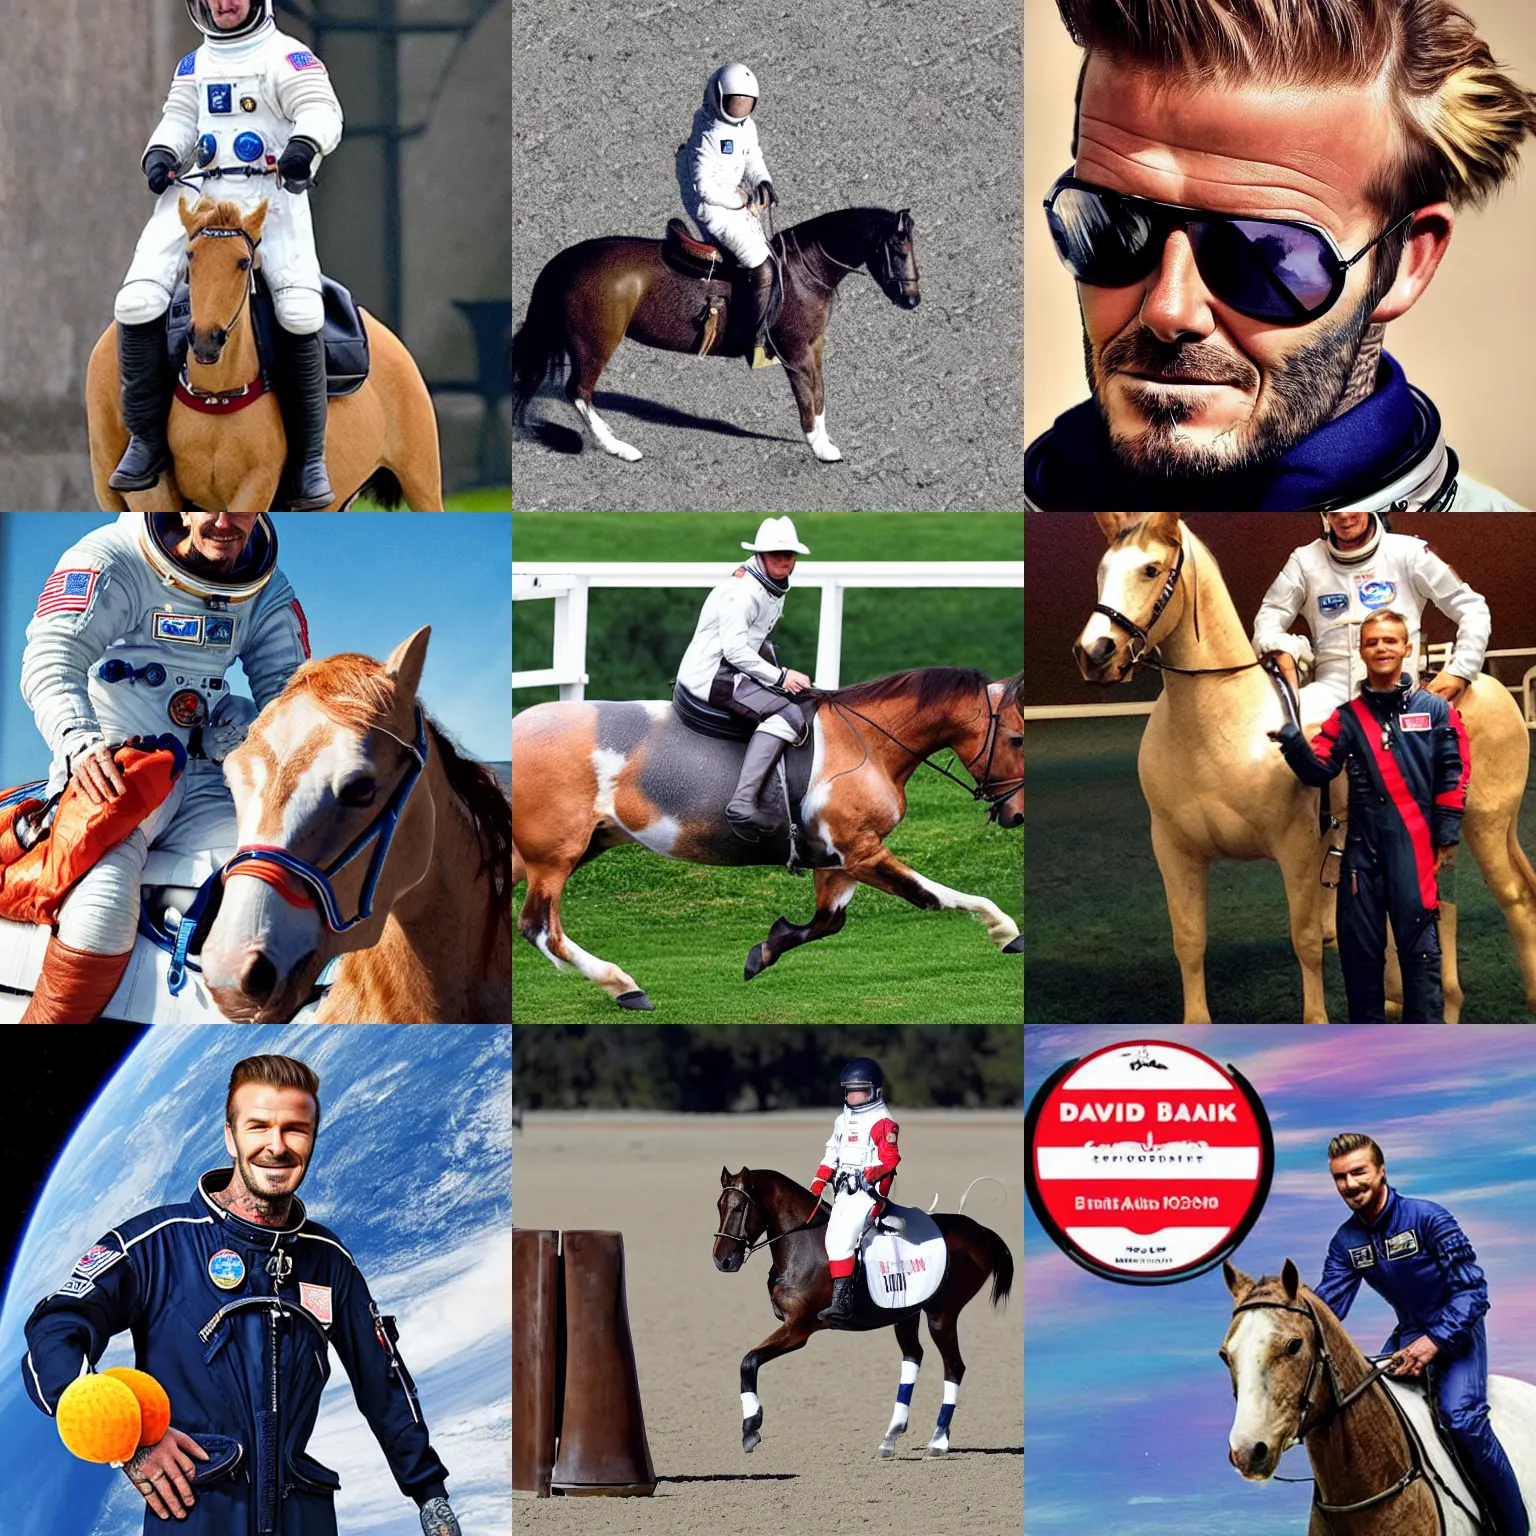 Prompt: David Beckham, on a horse, astronaut in space